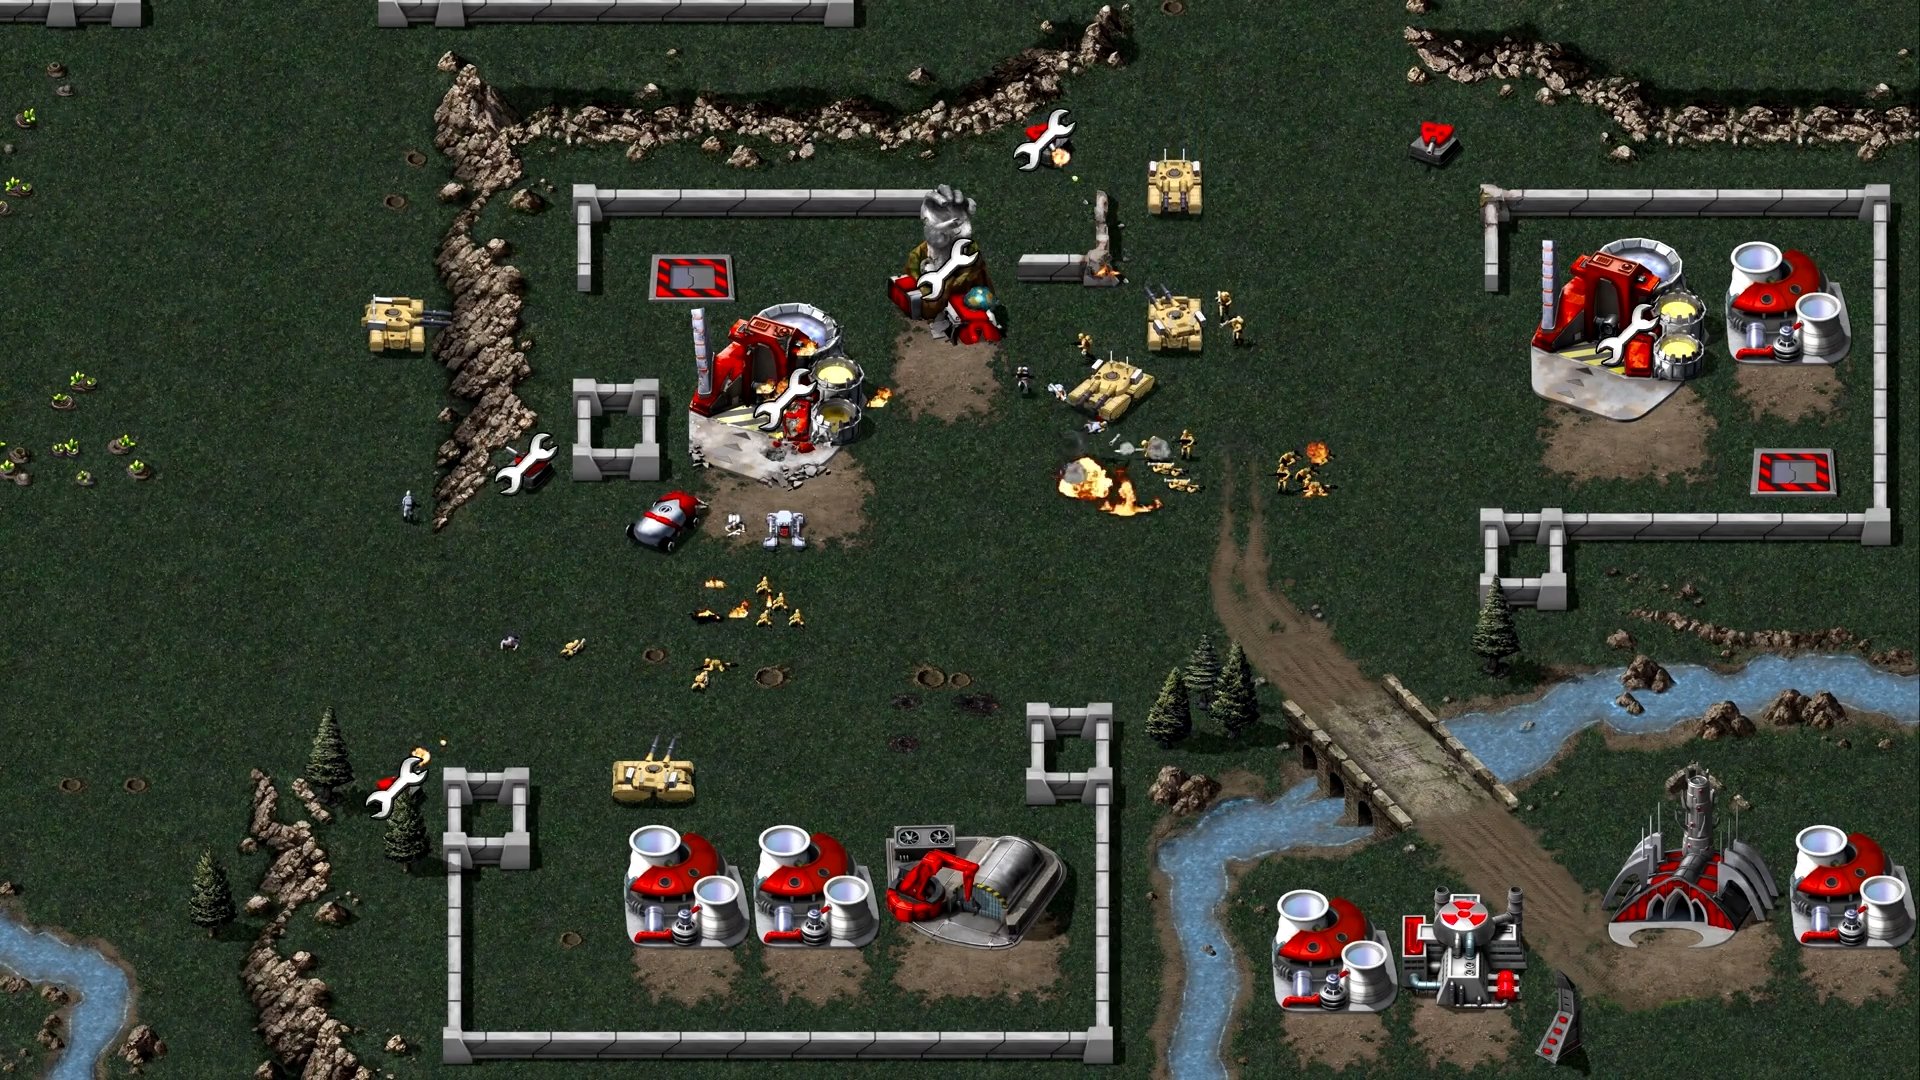 Command and conquer remastered. Command Conquer Remastered collection 2020. Red Alert 2020 Remastered. Command Conquer Red Alert 1 Remastered. Command Conquer 2 Remastered.